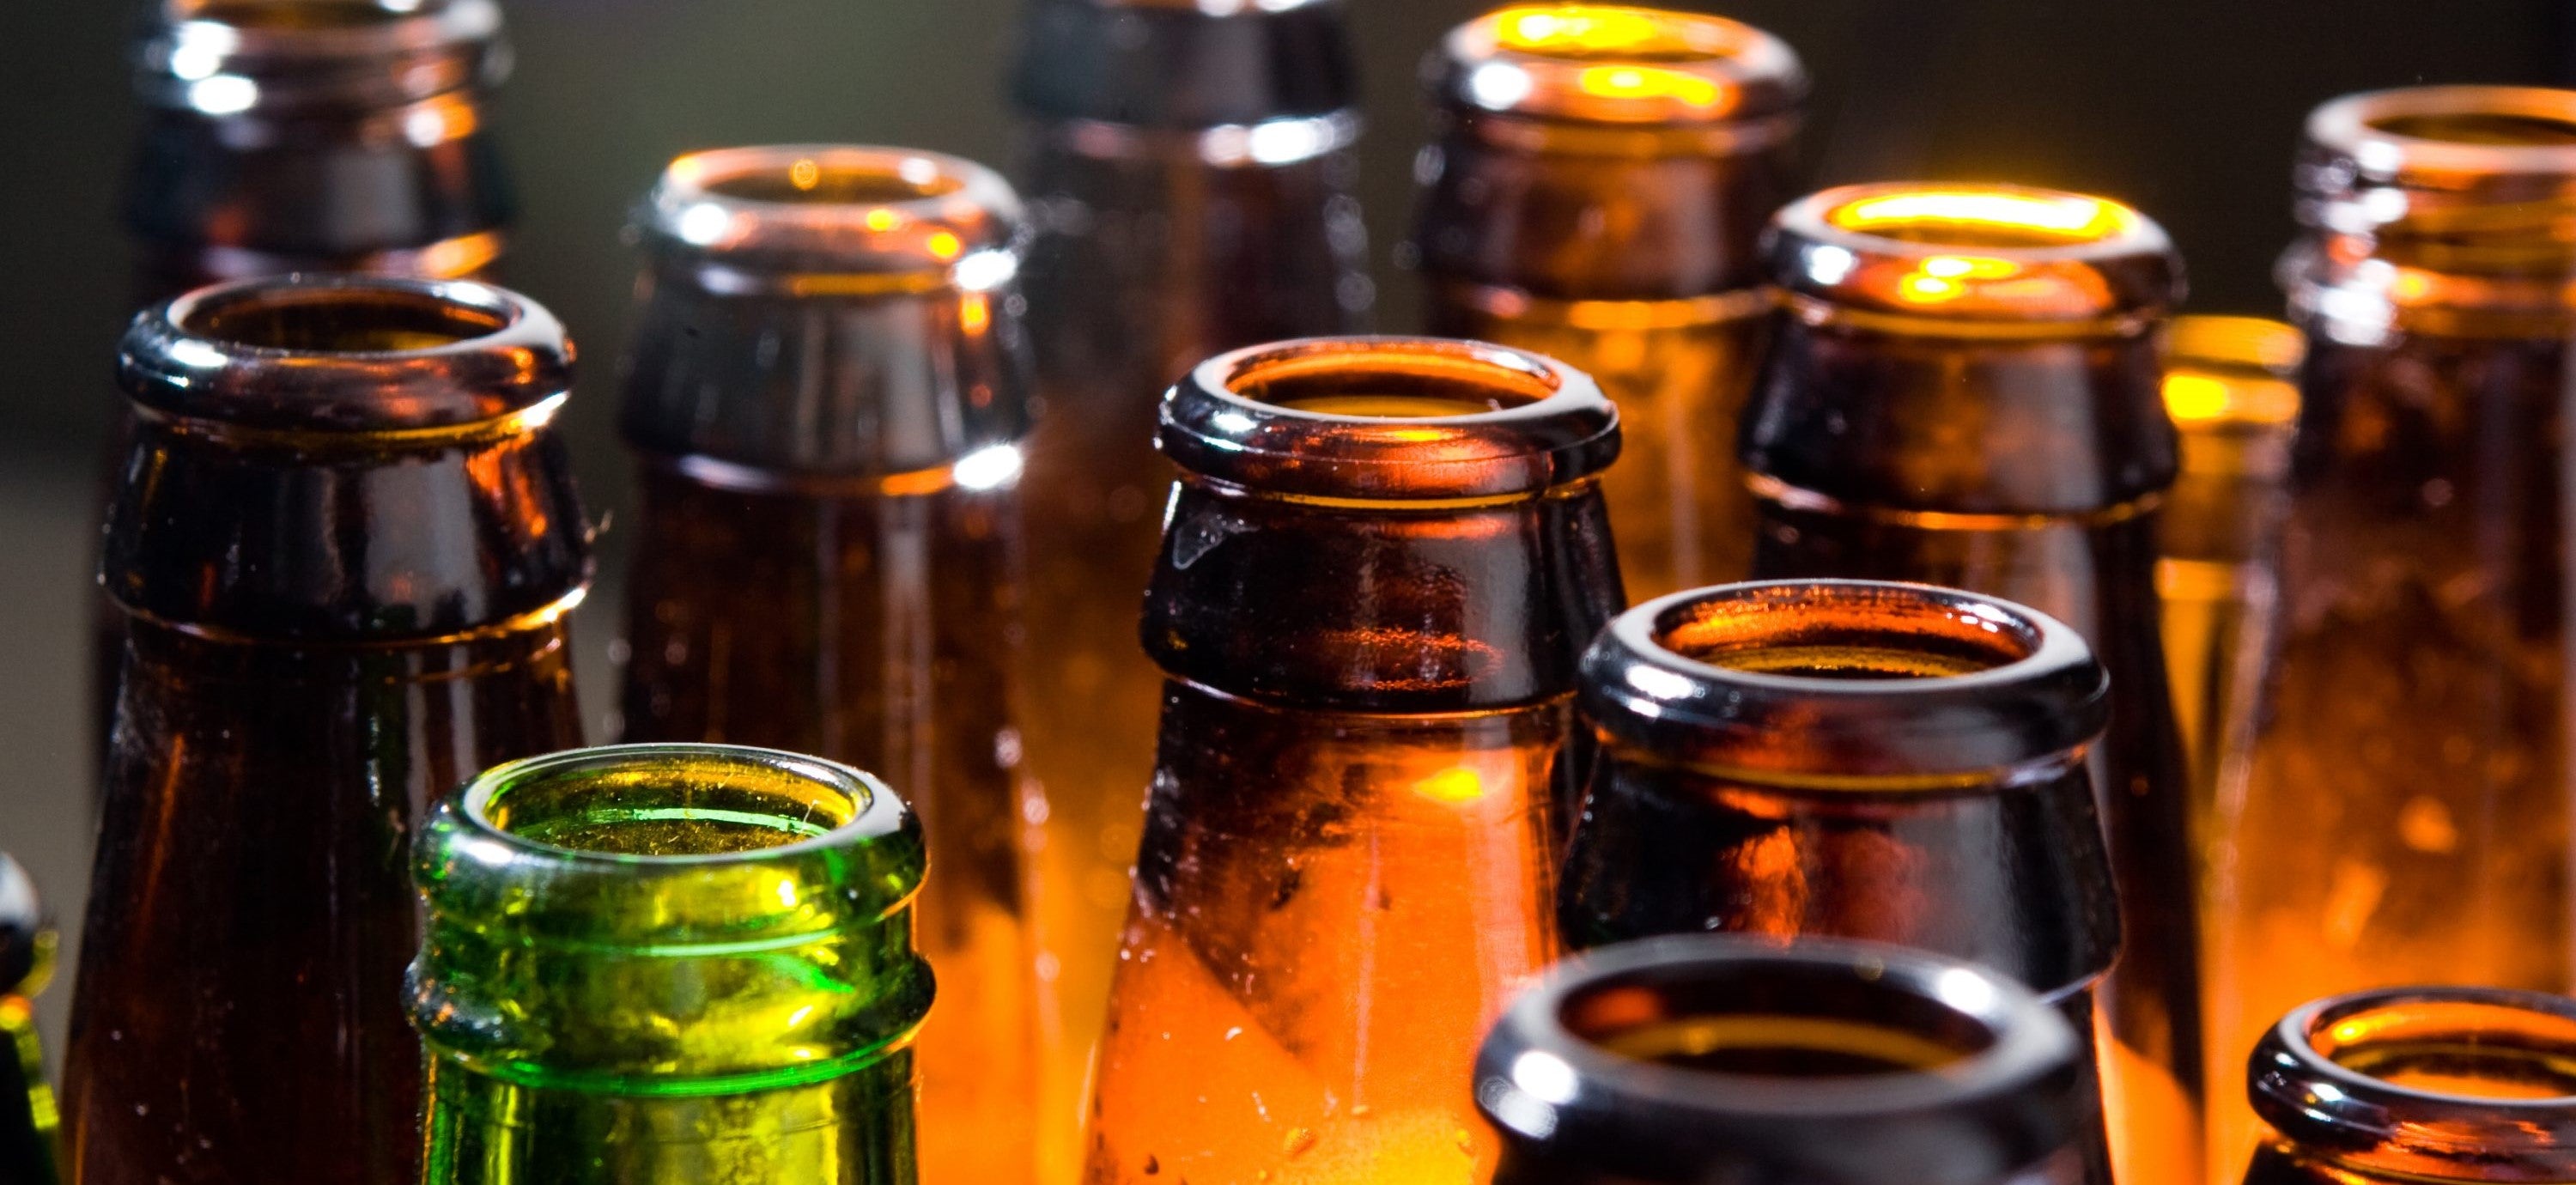 Does Beer Go Bad? Everything You Need to Know About Proper Storage and Beer Expiration Dates